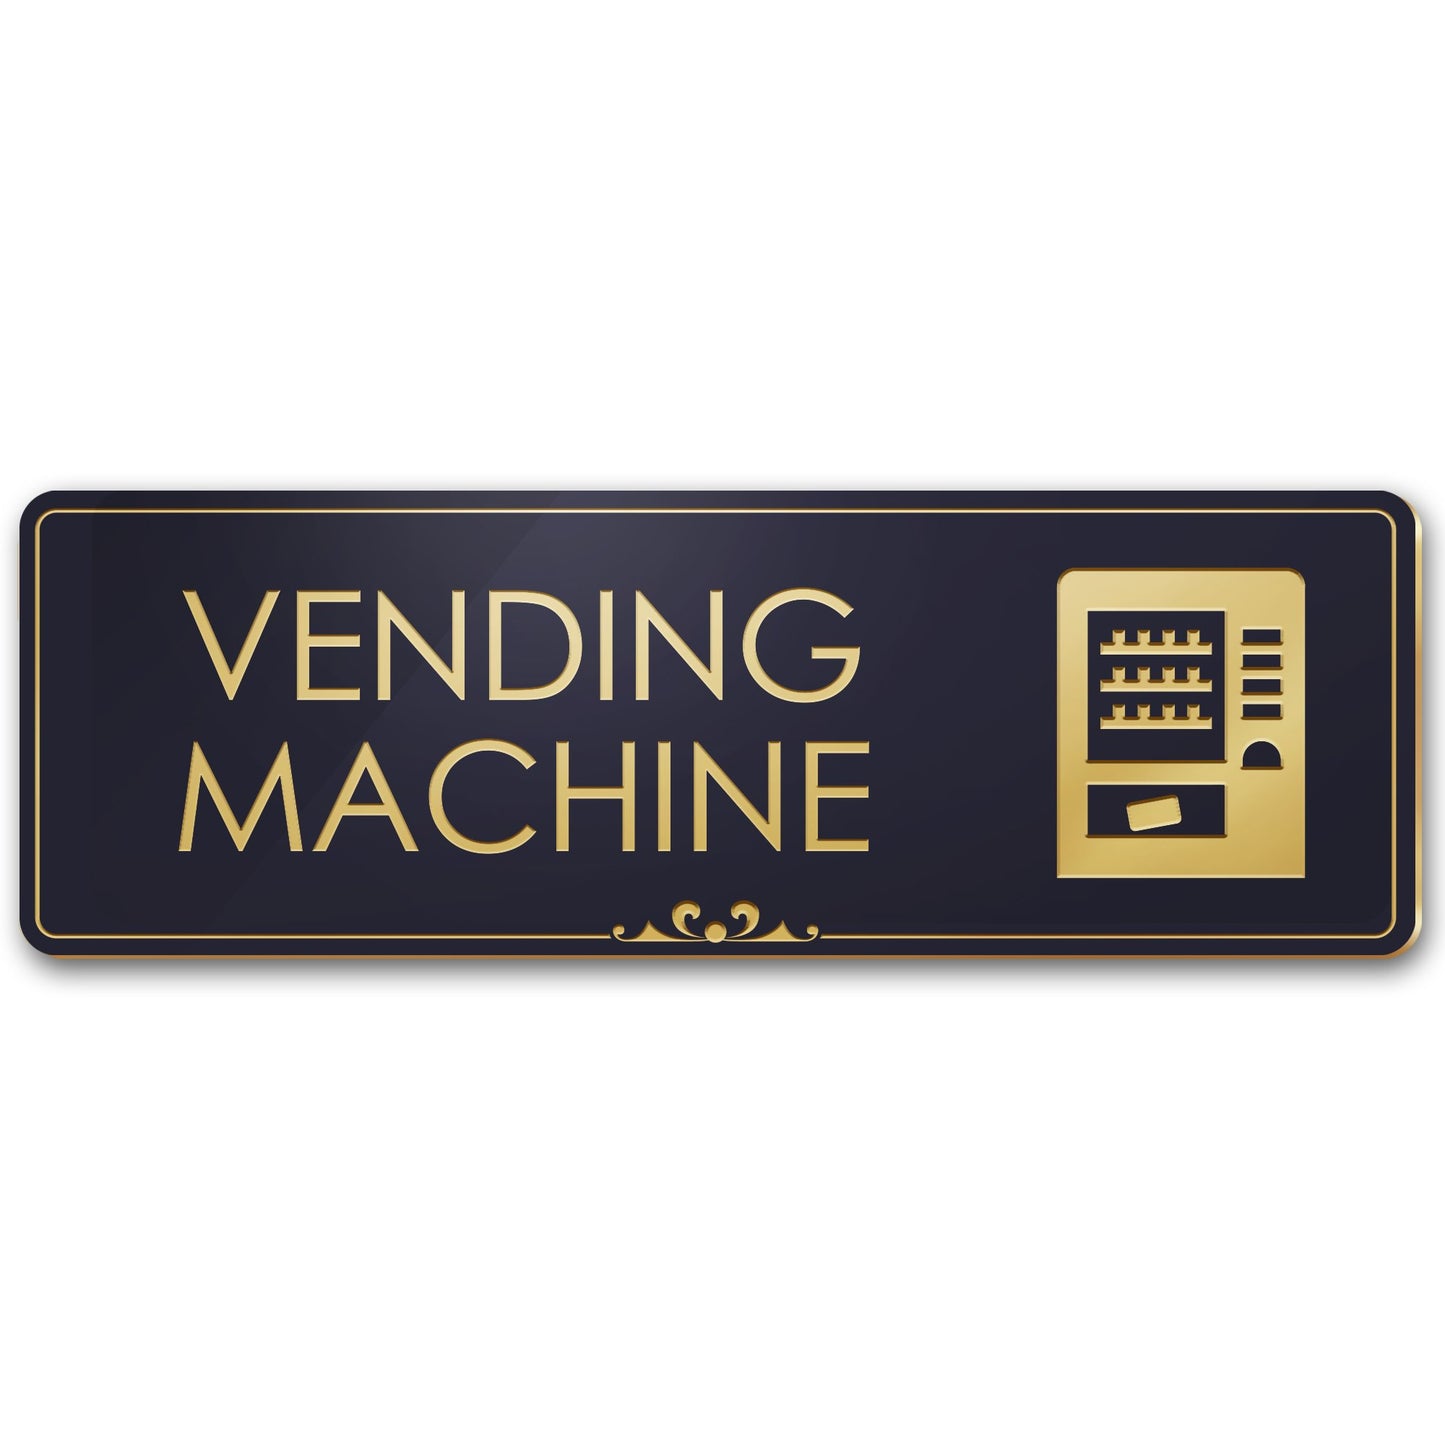 Vending Machines for Business Lunch Room Sign